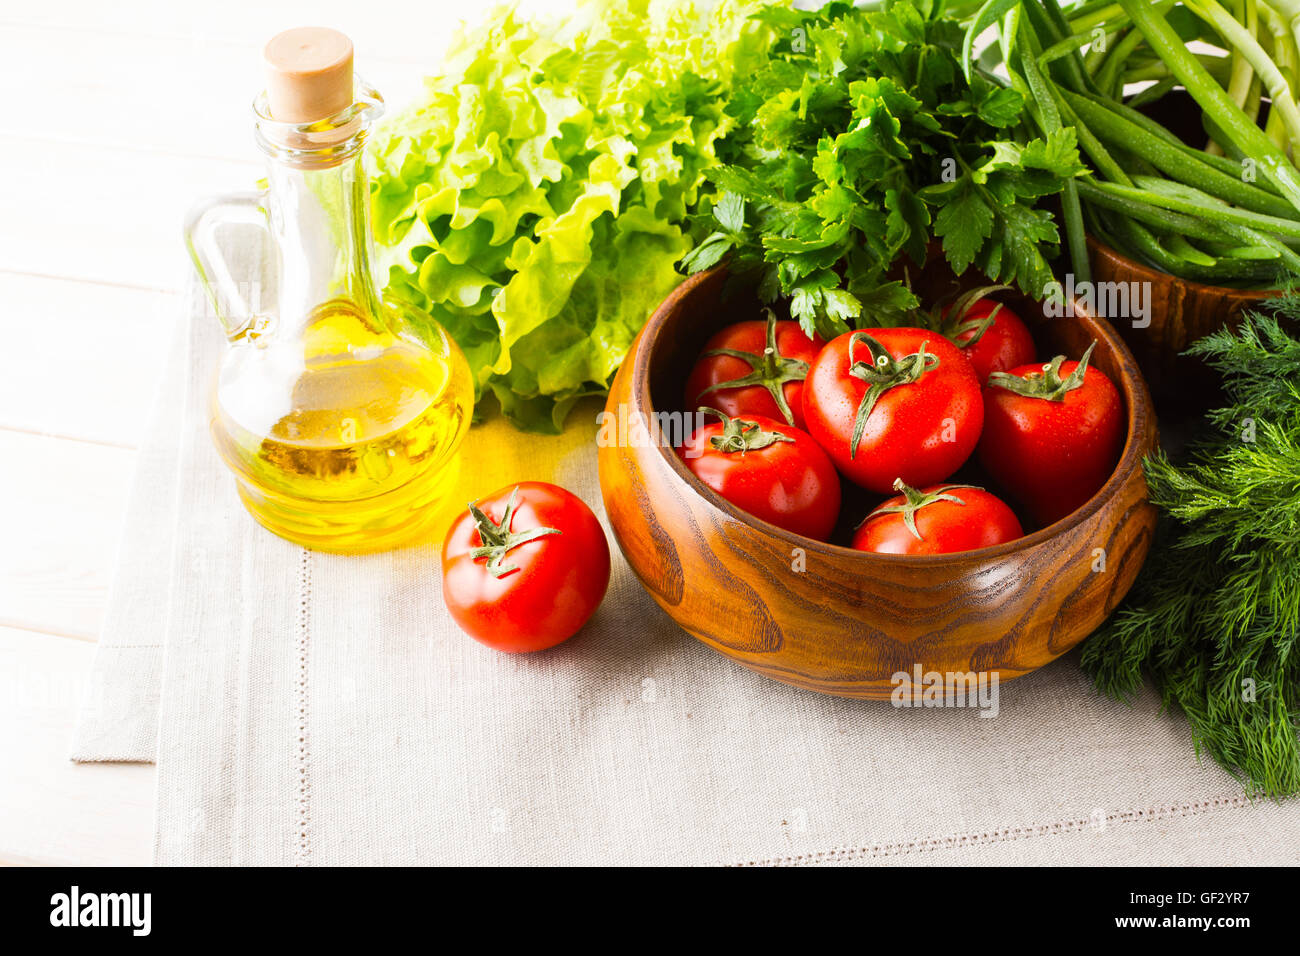 Vegetables and olive oil on the white wooden background. Healthy eating background. Detox or vegetarian food concept with fresh Stock Photo